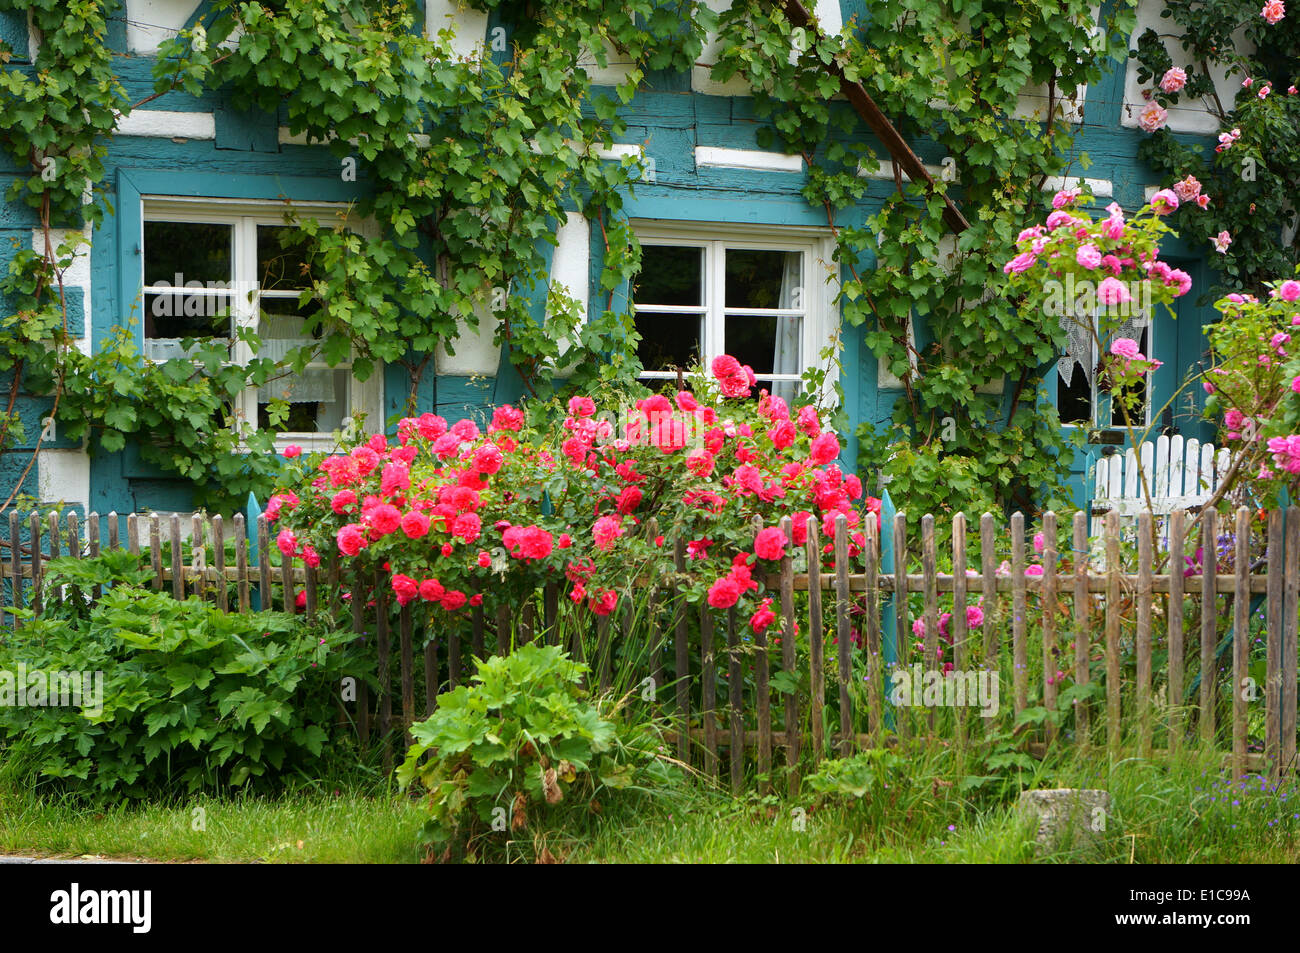 An traditonal house with rose garden and vines in South of germany Stock Photo